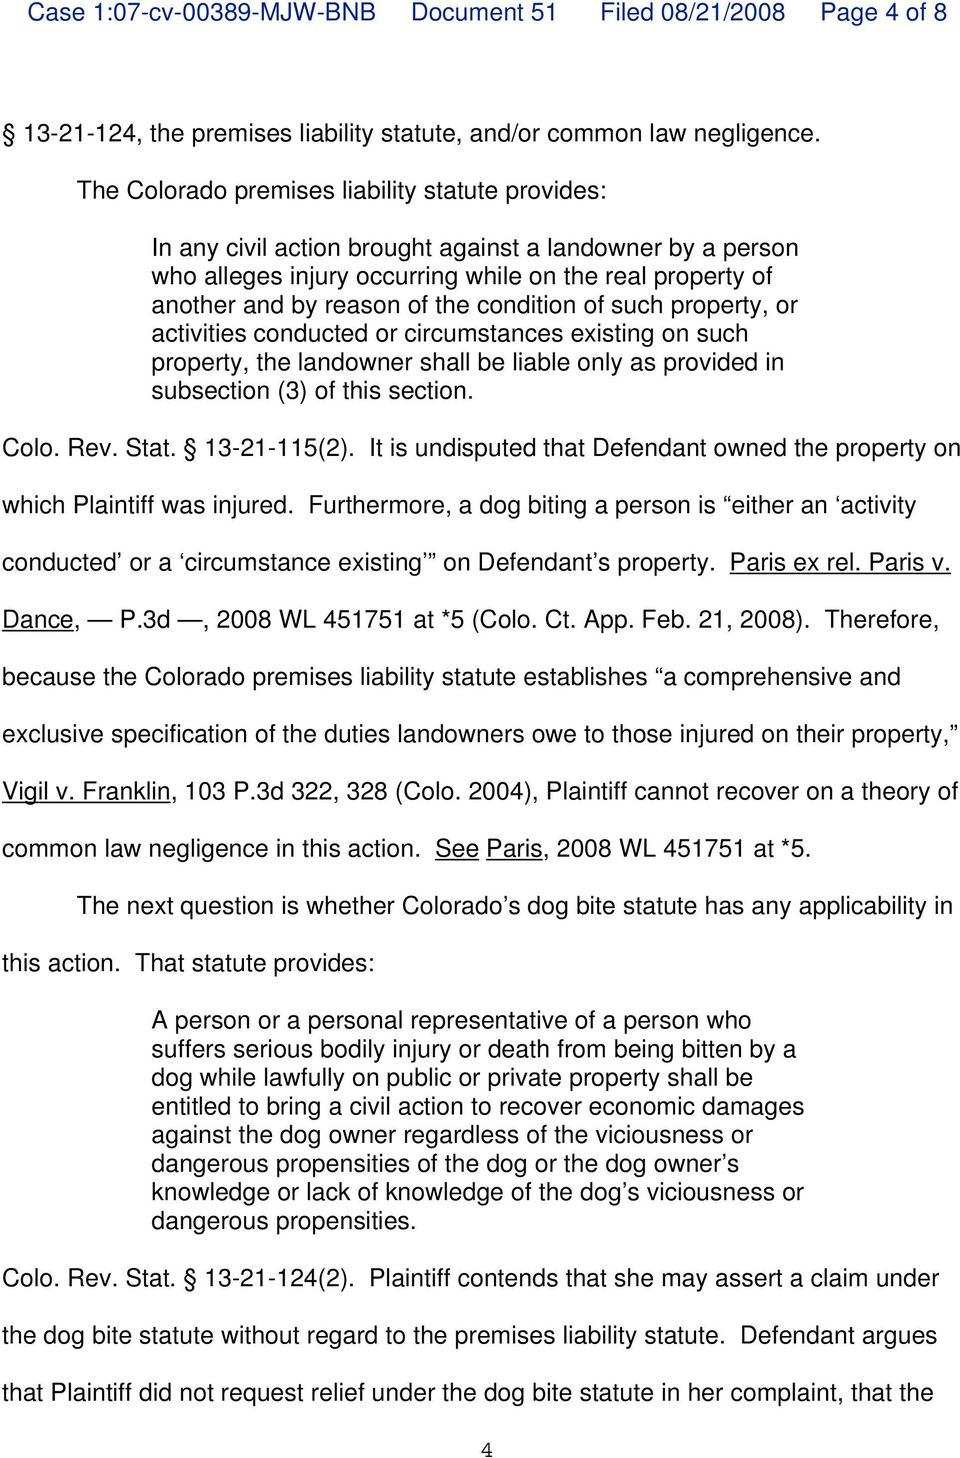 condition of such property, or activities conducted or circumstances existing on such property, the landowner shall be liable only as provided in subsection (3) of this section. Colo. Rev. Stat.